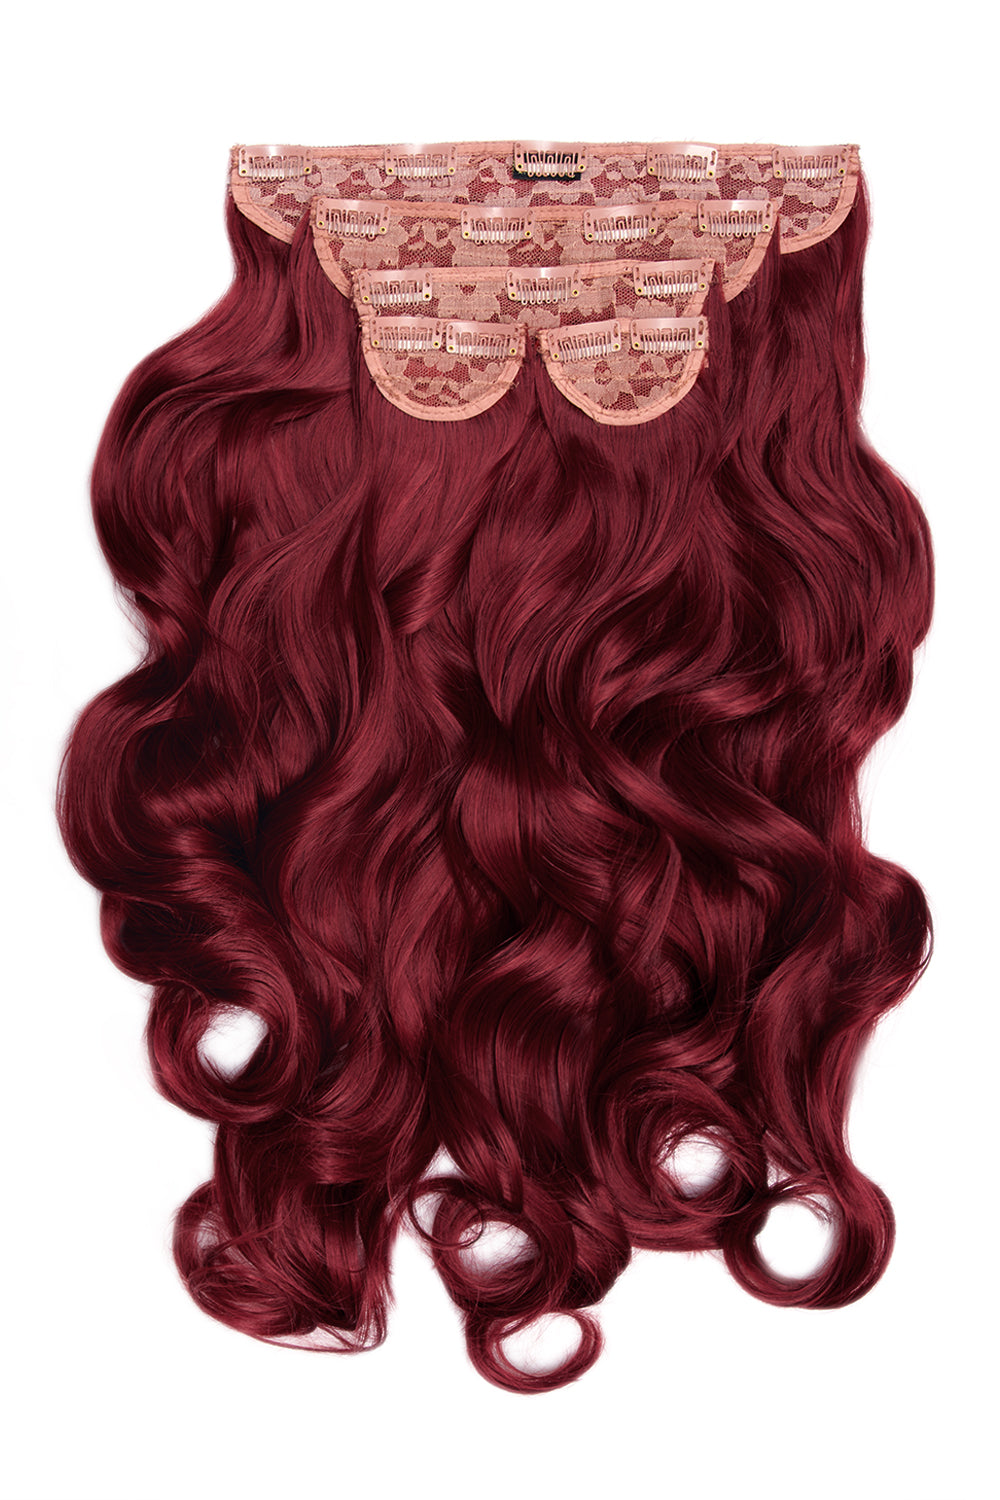 Super Thick 22" 5 Piece Curly Clip In Hair Extensions - Burgundy